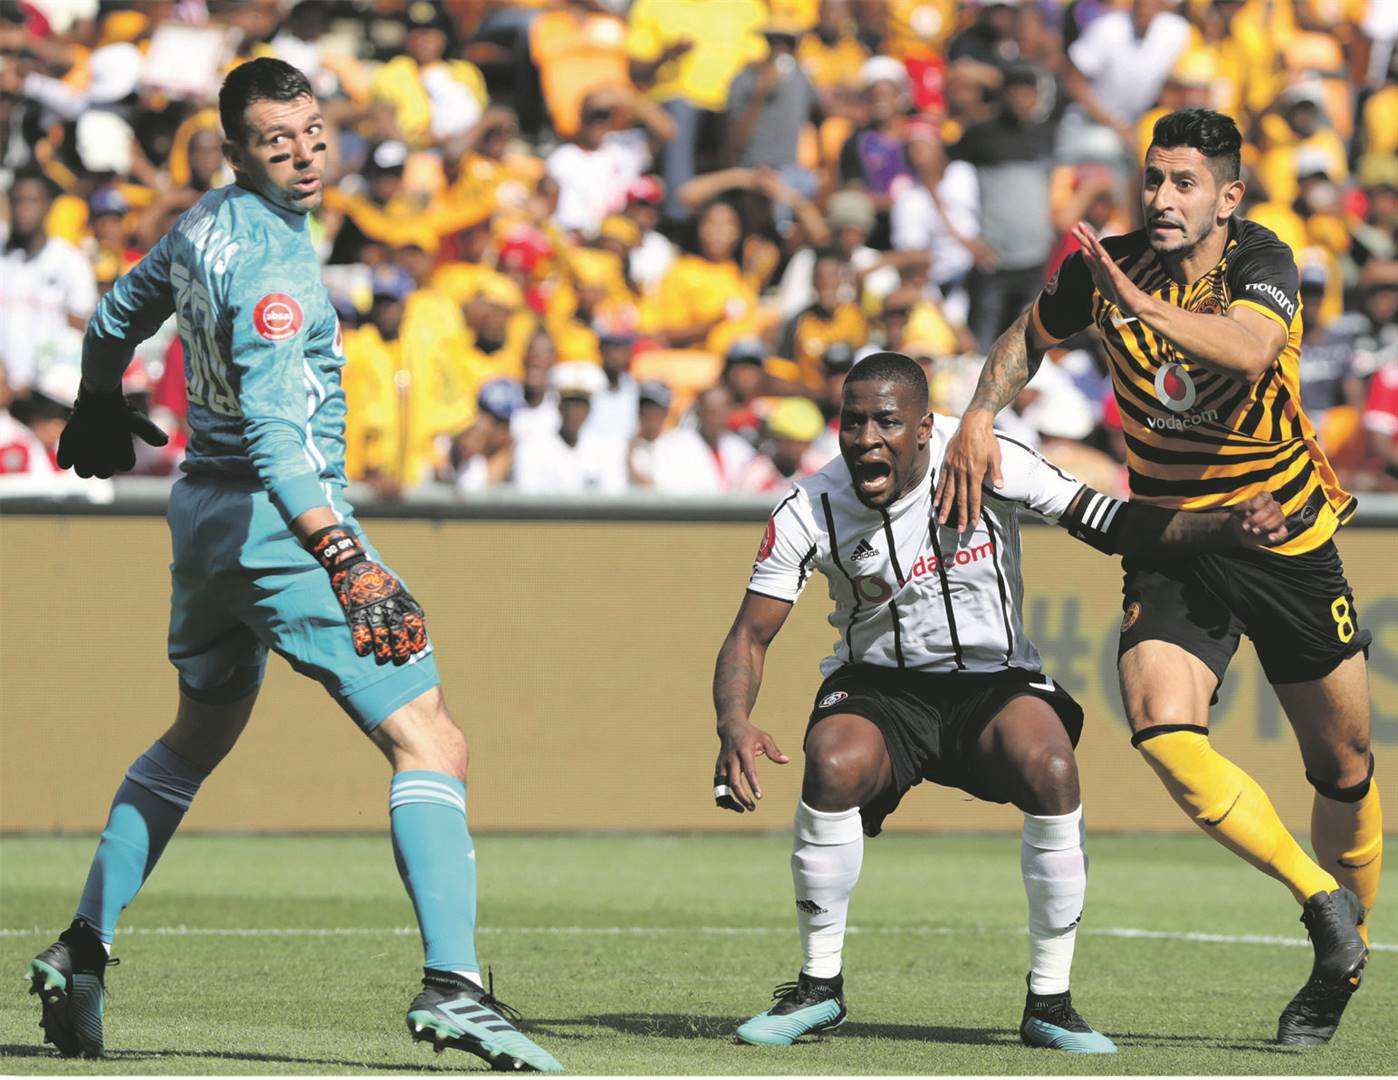 Defining moment Orlando Pirates captain Ntsikelelo Nyauza reacts after his own goal gave Kaizer Chiefs an early lead in yesterday’s Soweto derby. Leonardo Castro put one past Bucs goalkeeper Wayne Sandilands in the five-goal thriller. Picture: Gavin Barker / BackpagePix